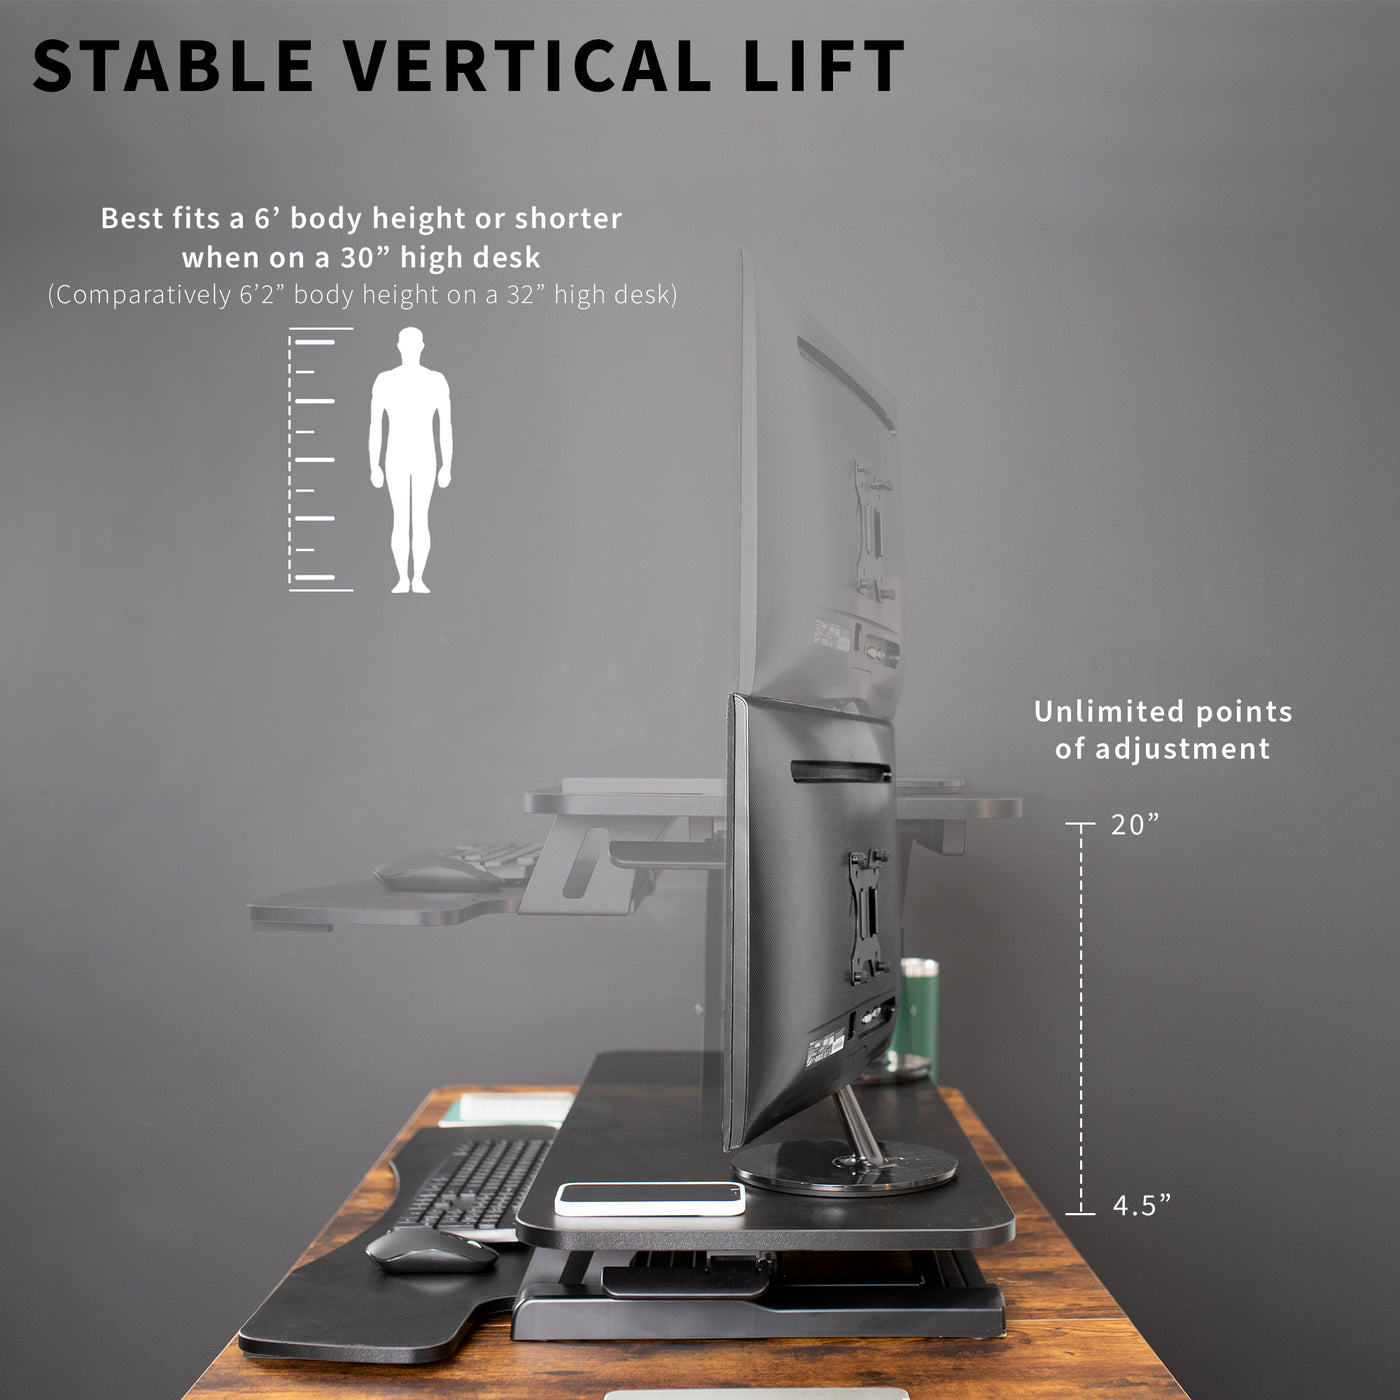 Desk riser is compatible with a variety of heights to maximize every individual comfortable working height.